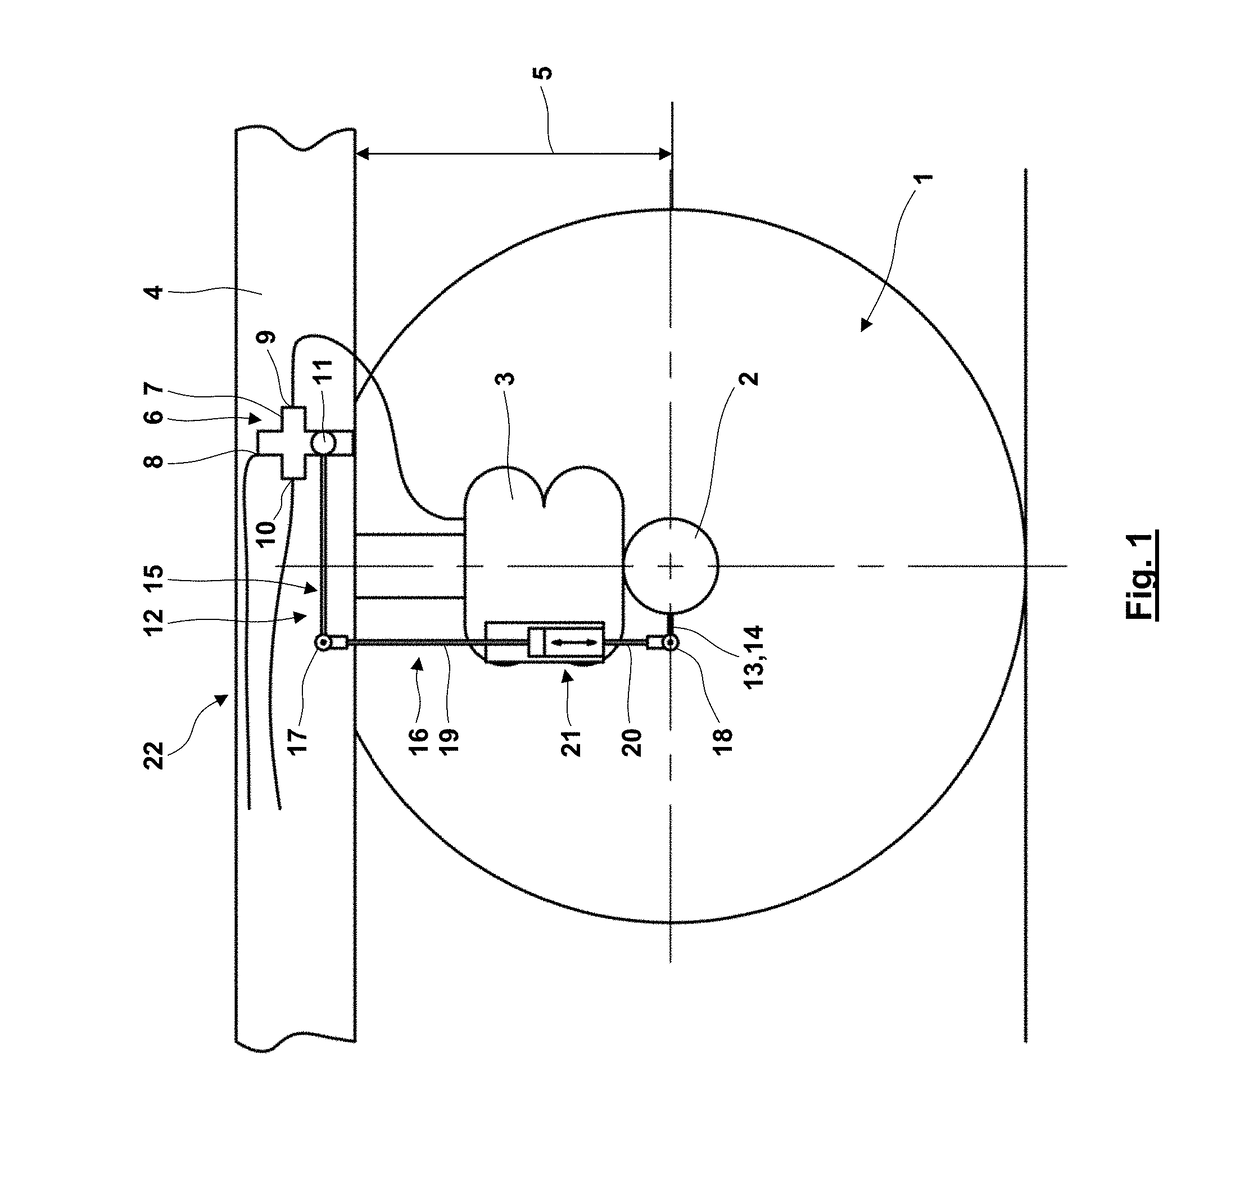 Mechanically actuated leveling valve mechanism